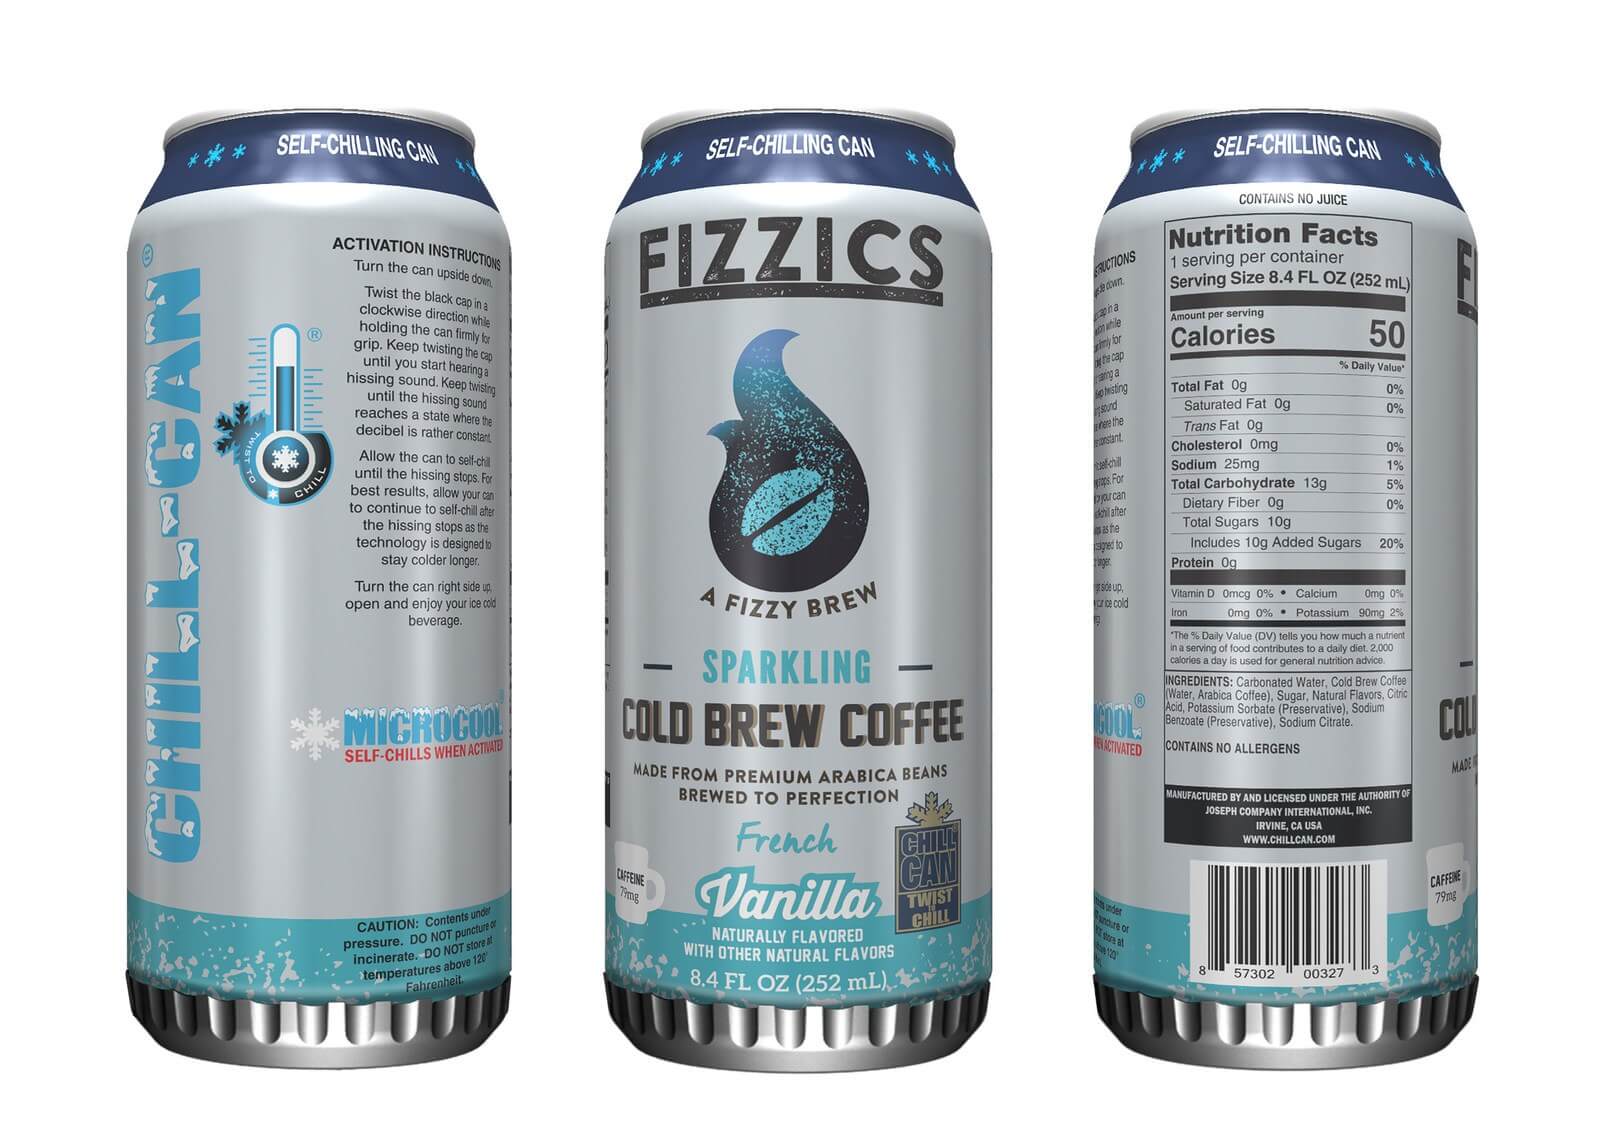 7-Eleven's self-chilling cans cool your coffee with CO2